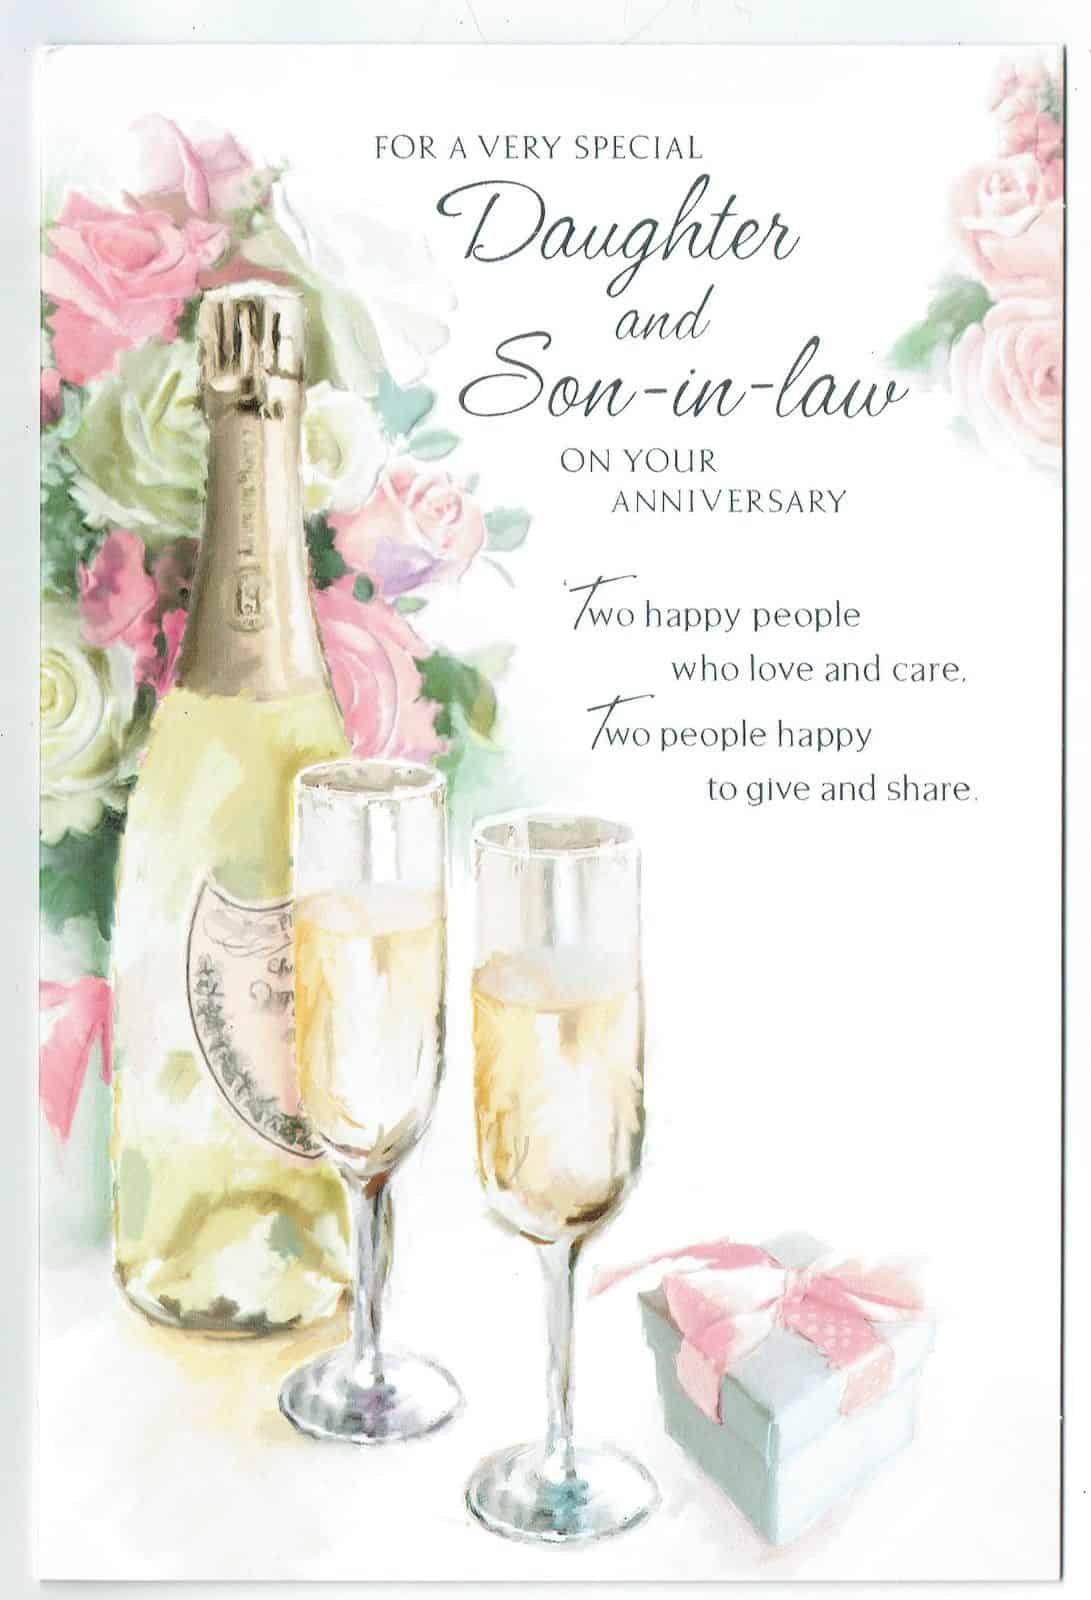 daughter-son-in-law-10th-wedding-anniversary-card-4-colours-ebay